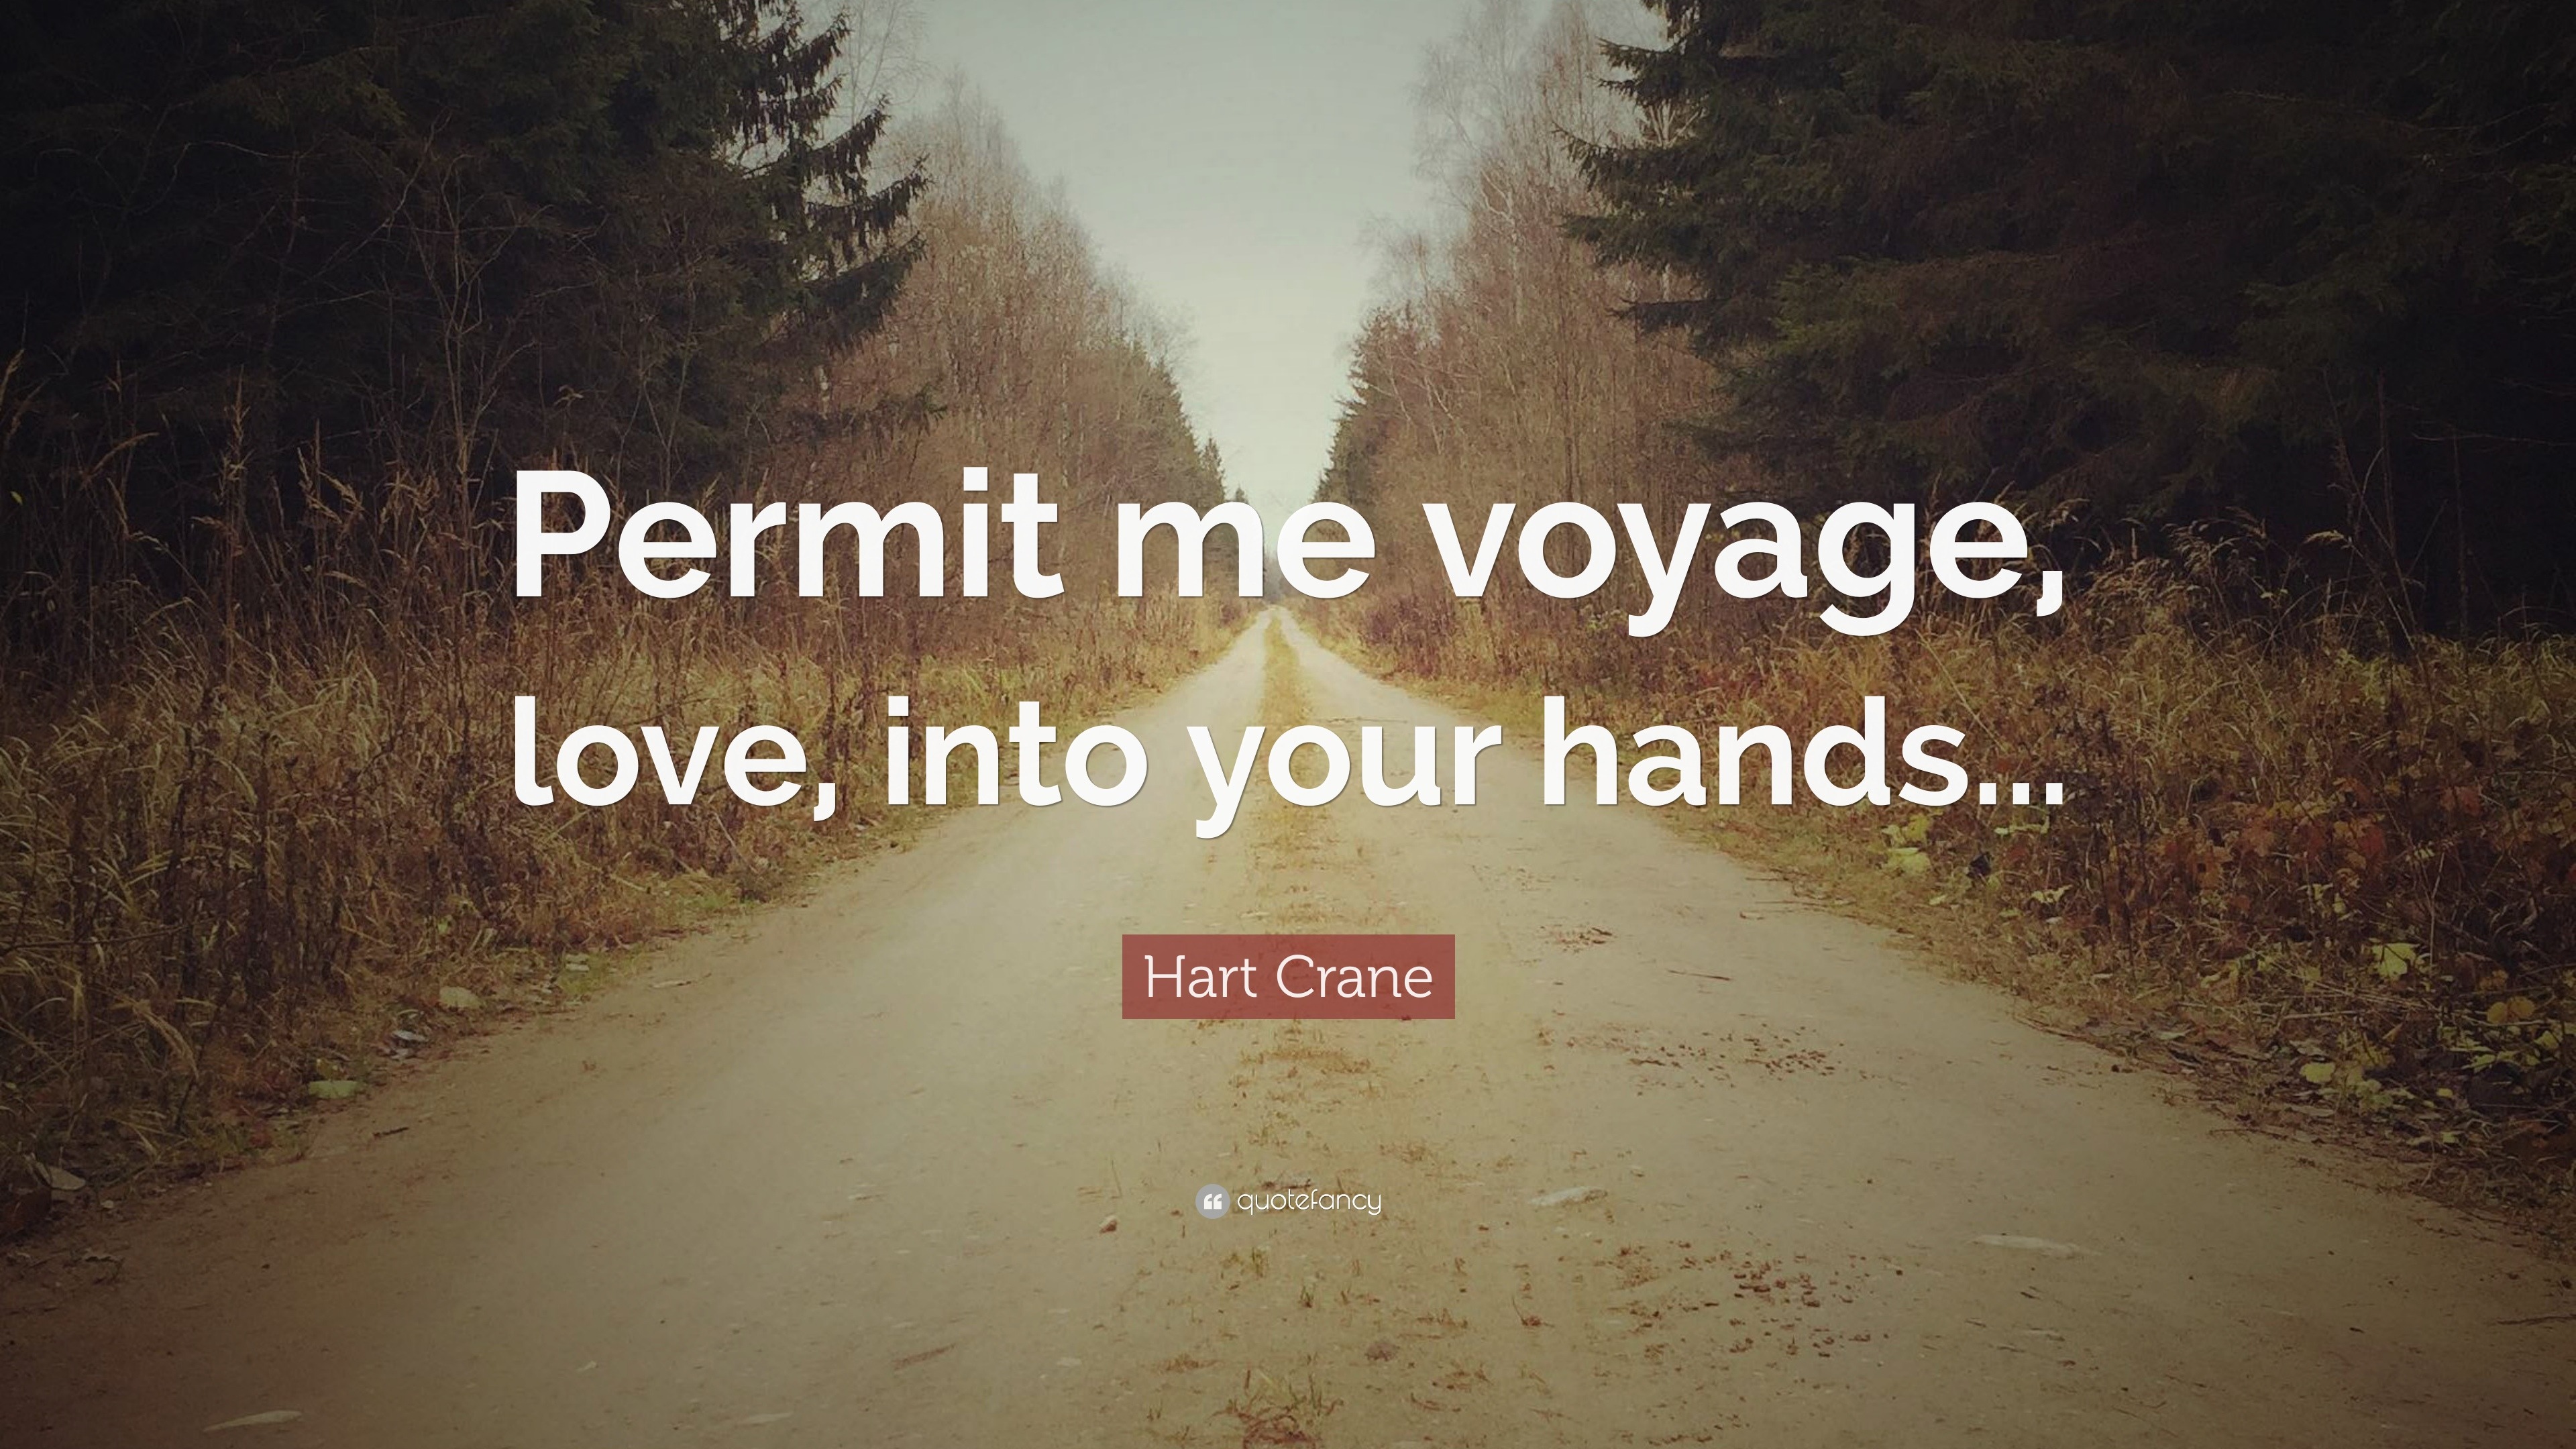 permit me voyage meaning